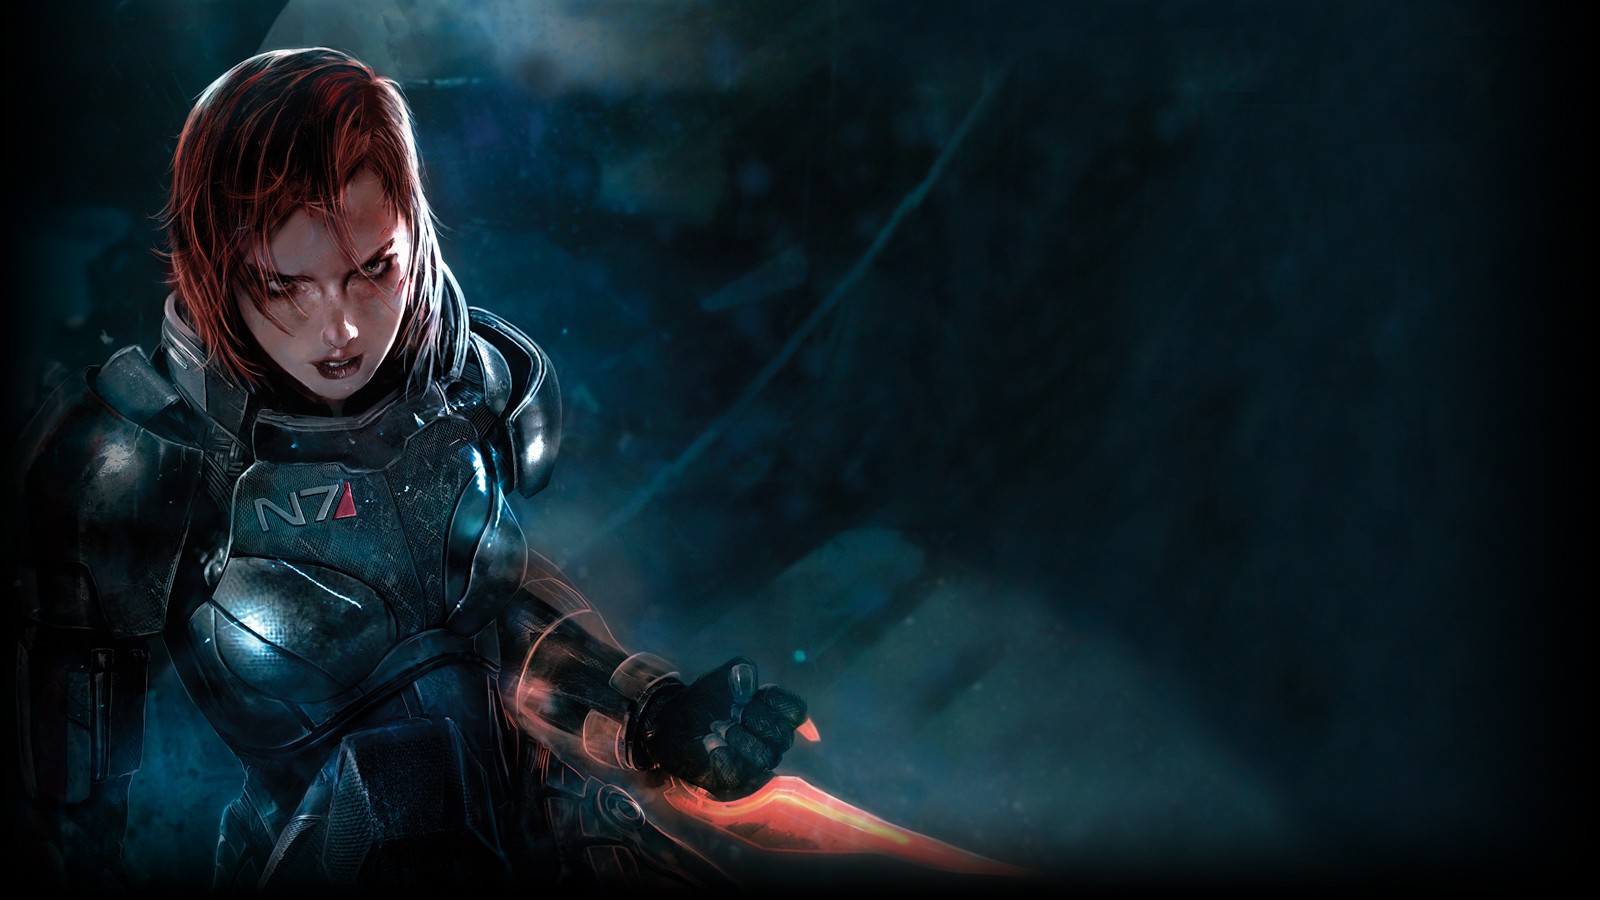 game wallpapers #1 ( mass effect 2 )